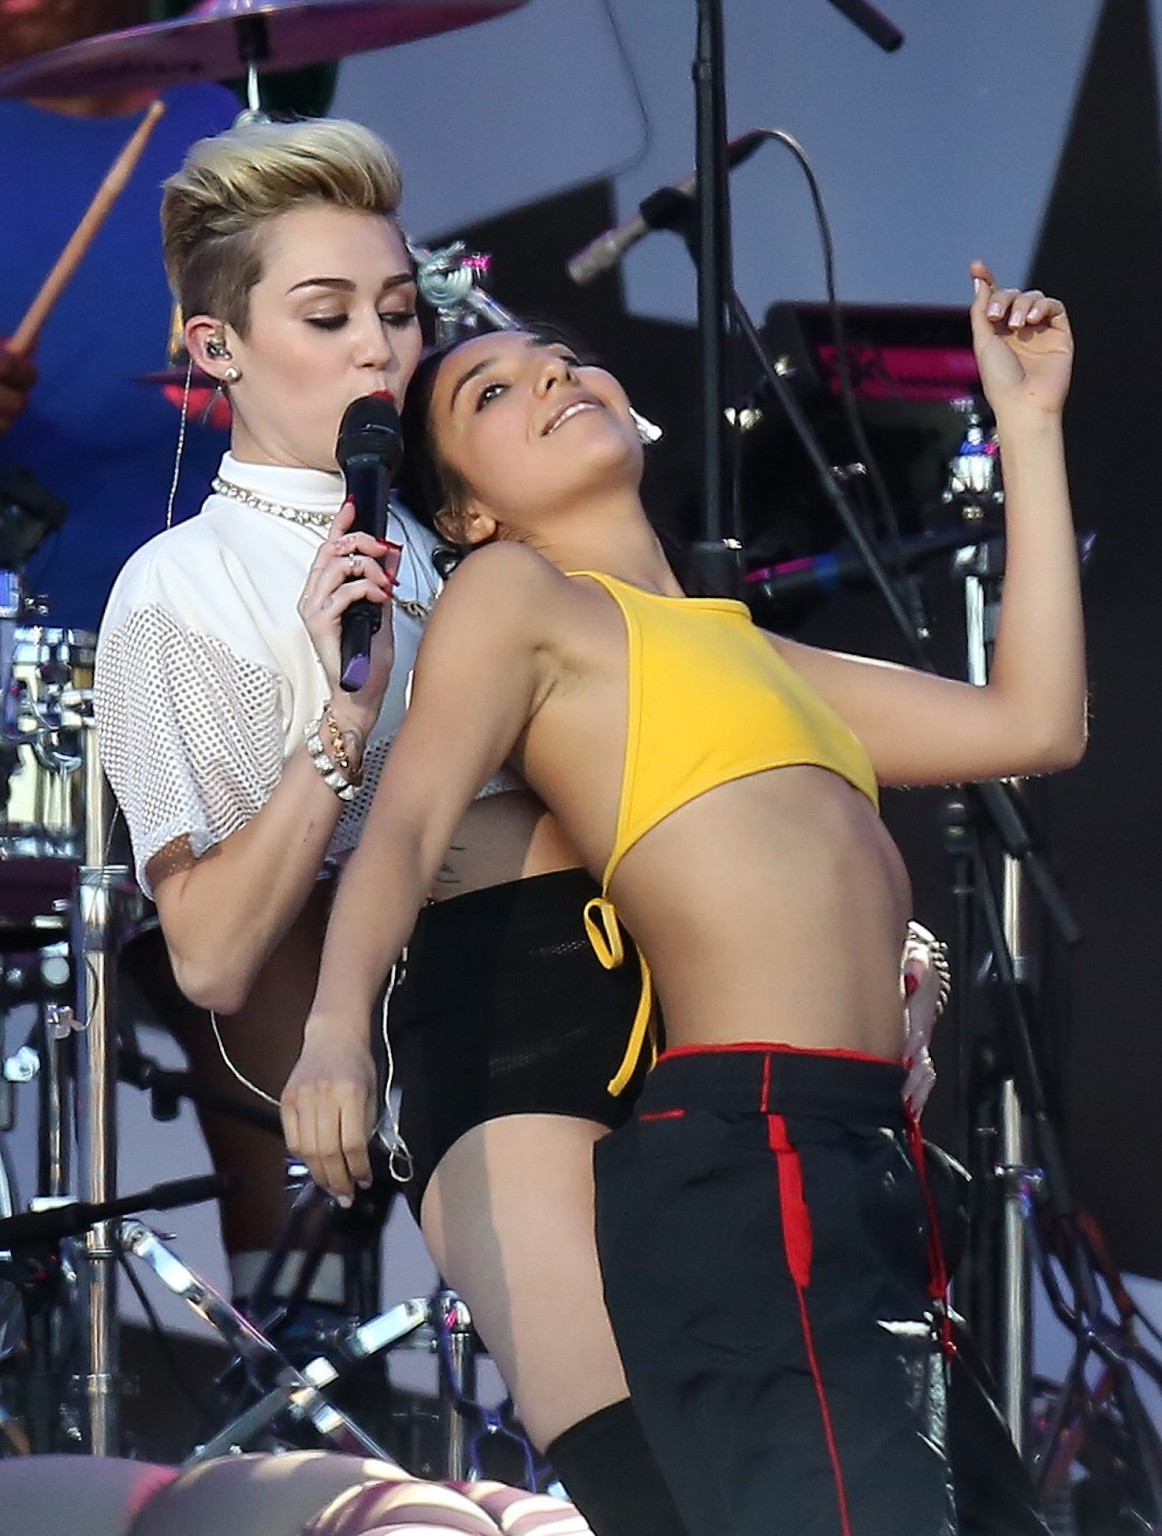 Miley Cyrus in panties  fuck-me boots performing at the Jimmy Kimmel show #75227041